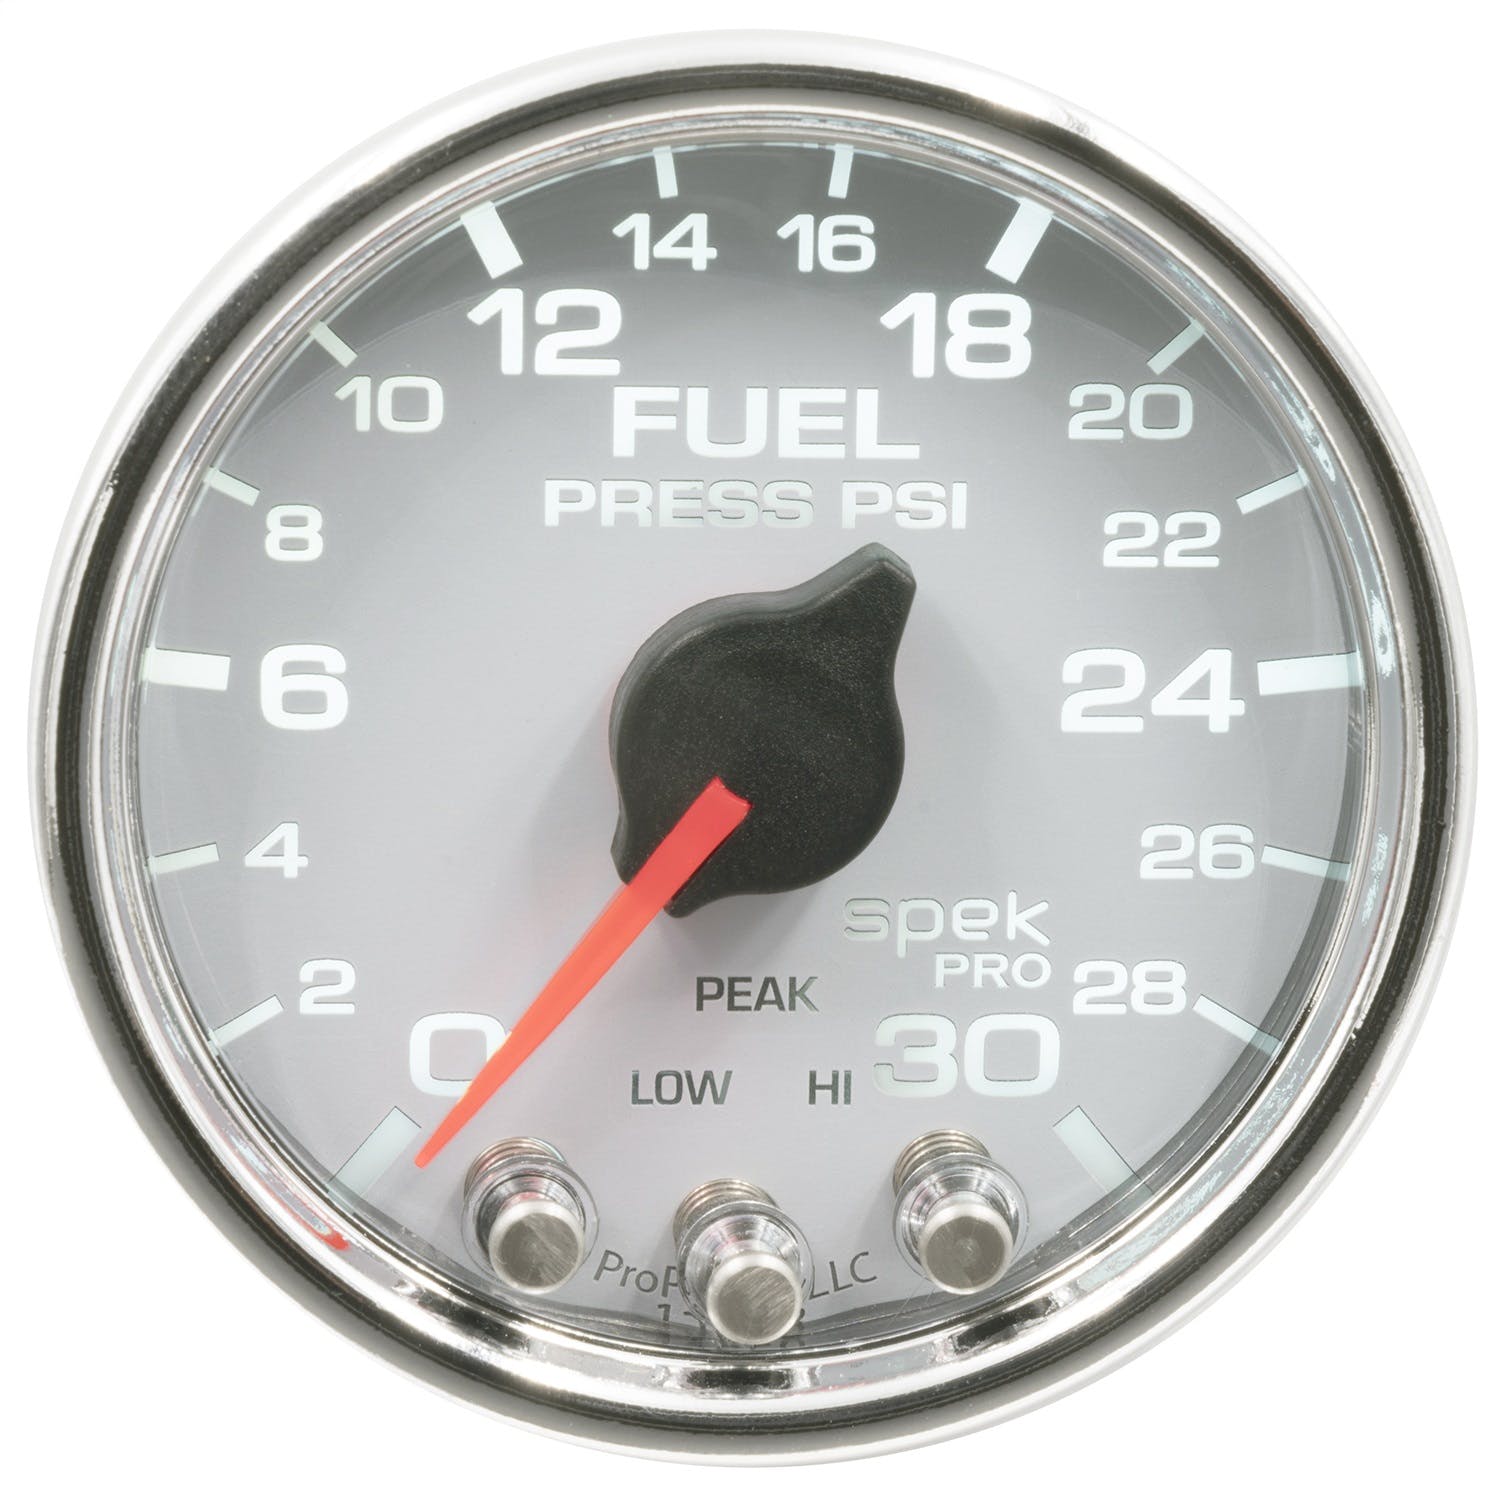 AutoMeter Products P31611 Fuel Press Gauge, 2 1/16, 30PSI, Stepper Motor w/Peak and Warning, White/Chrome